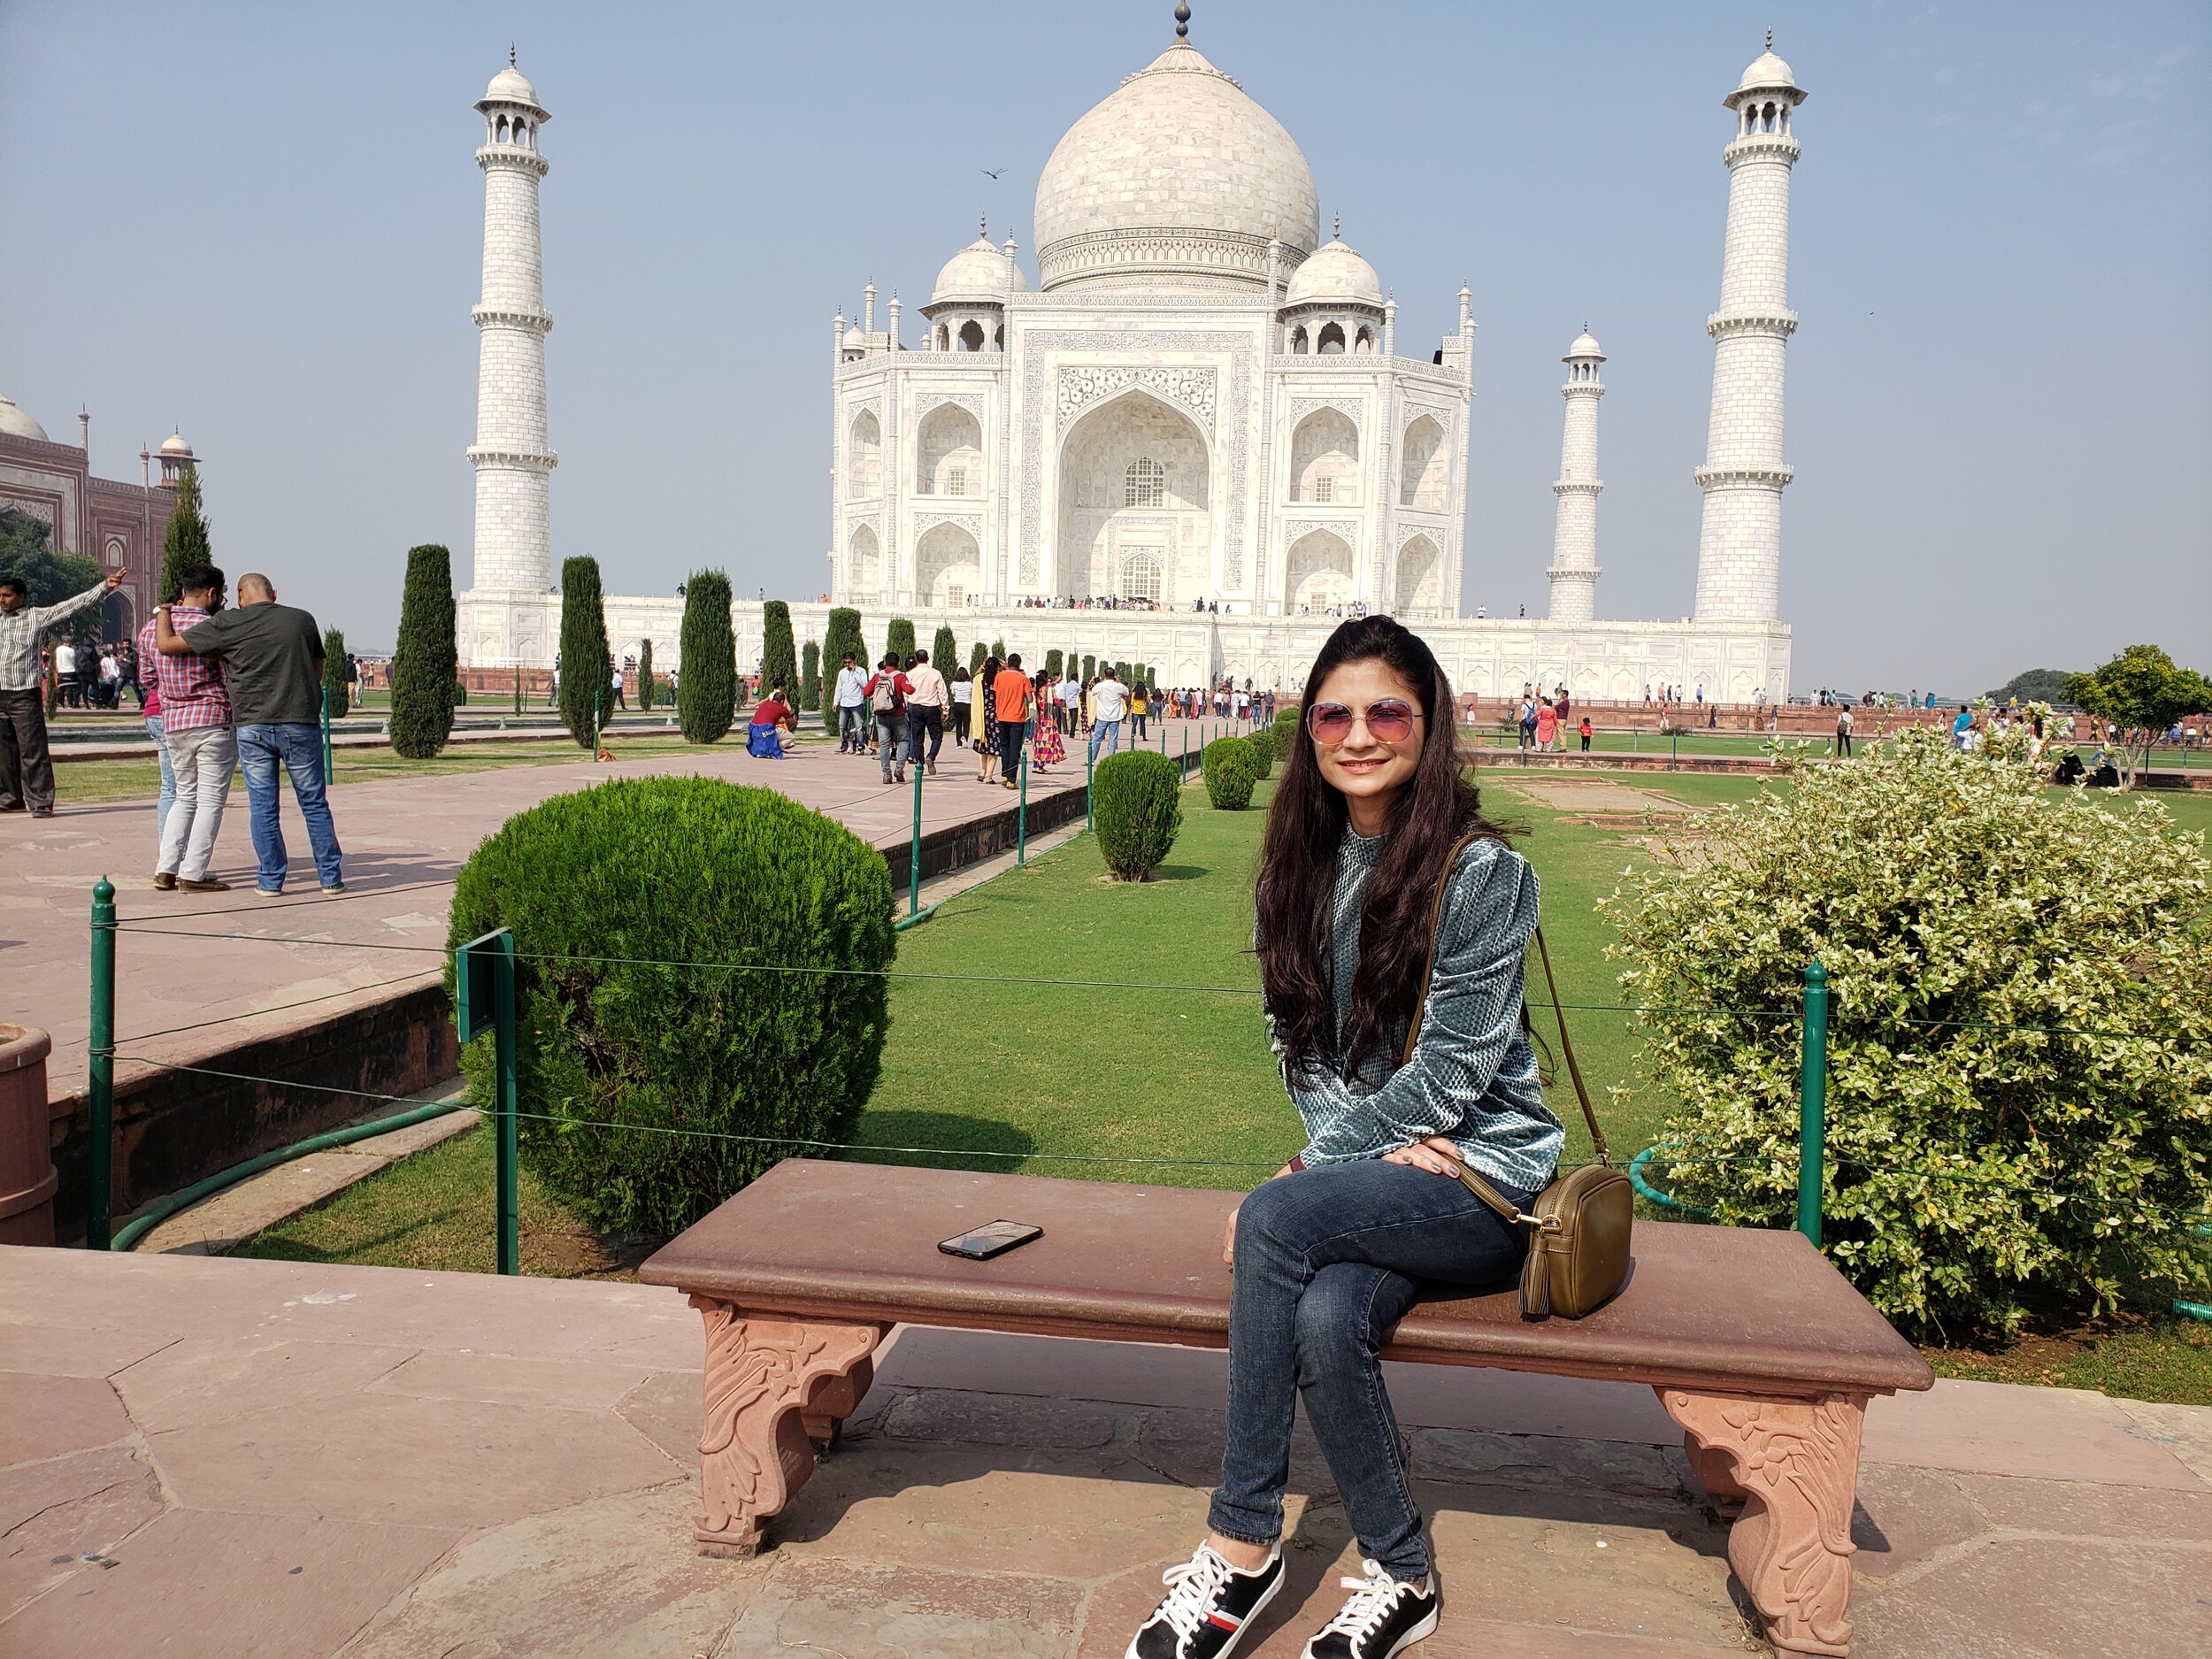 Bhumi Pednekar poses for a beautiful picture with Taj Mahal in the backdrop